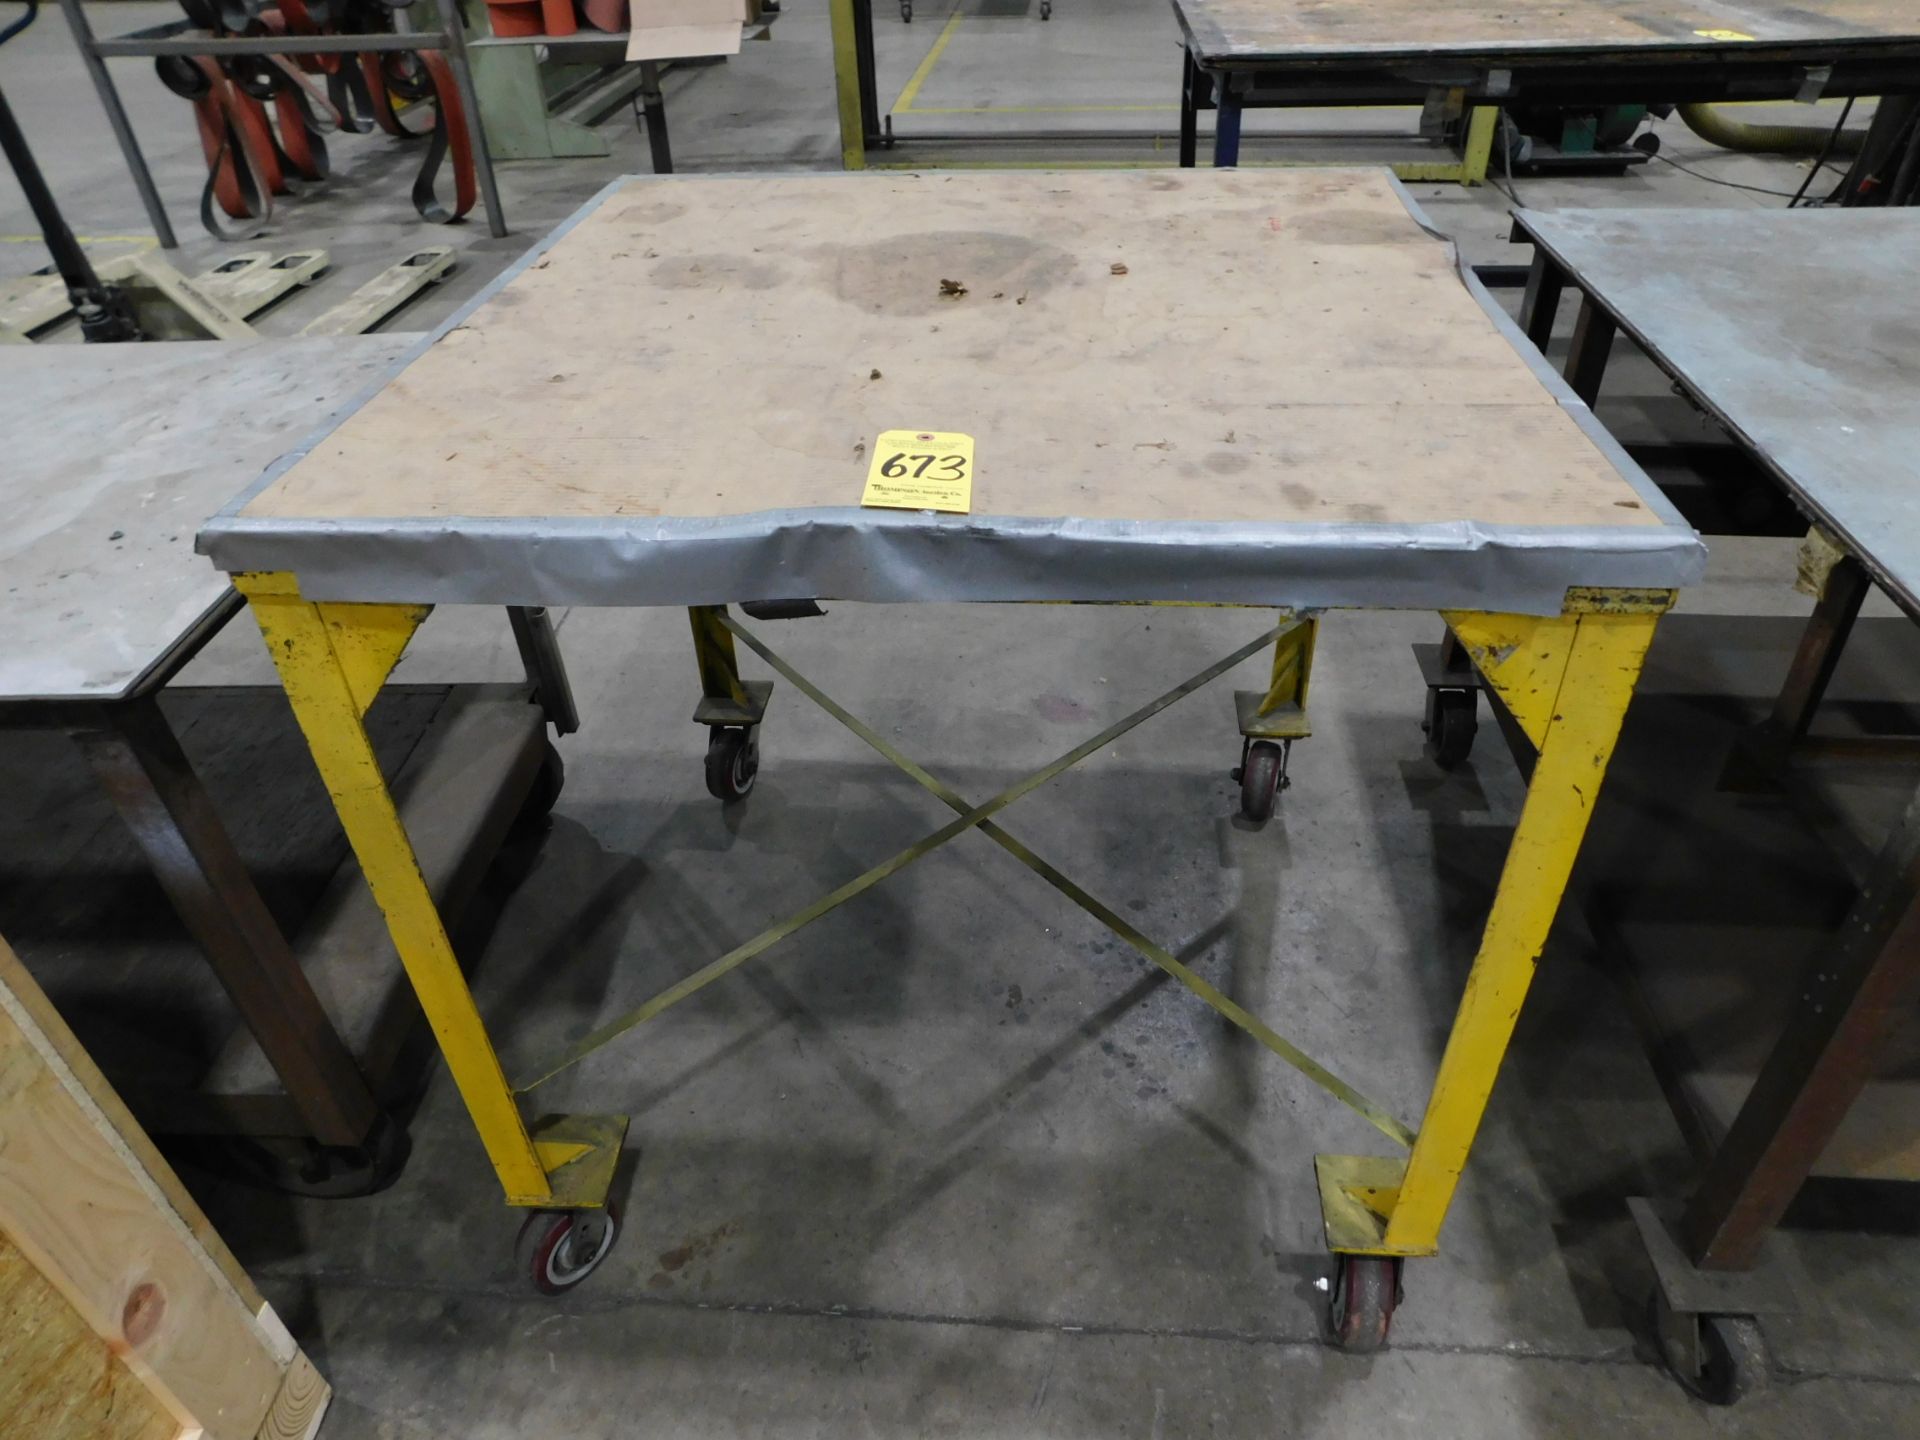 Shop Table on Casters, 40" X 40" X 40" High